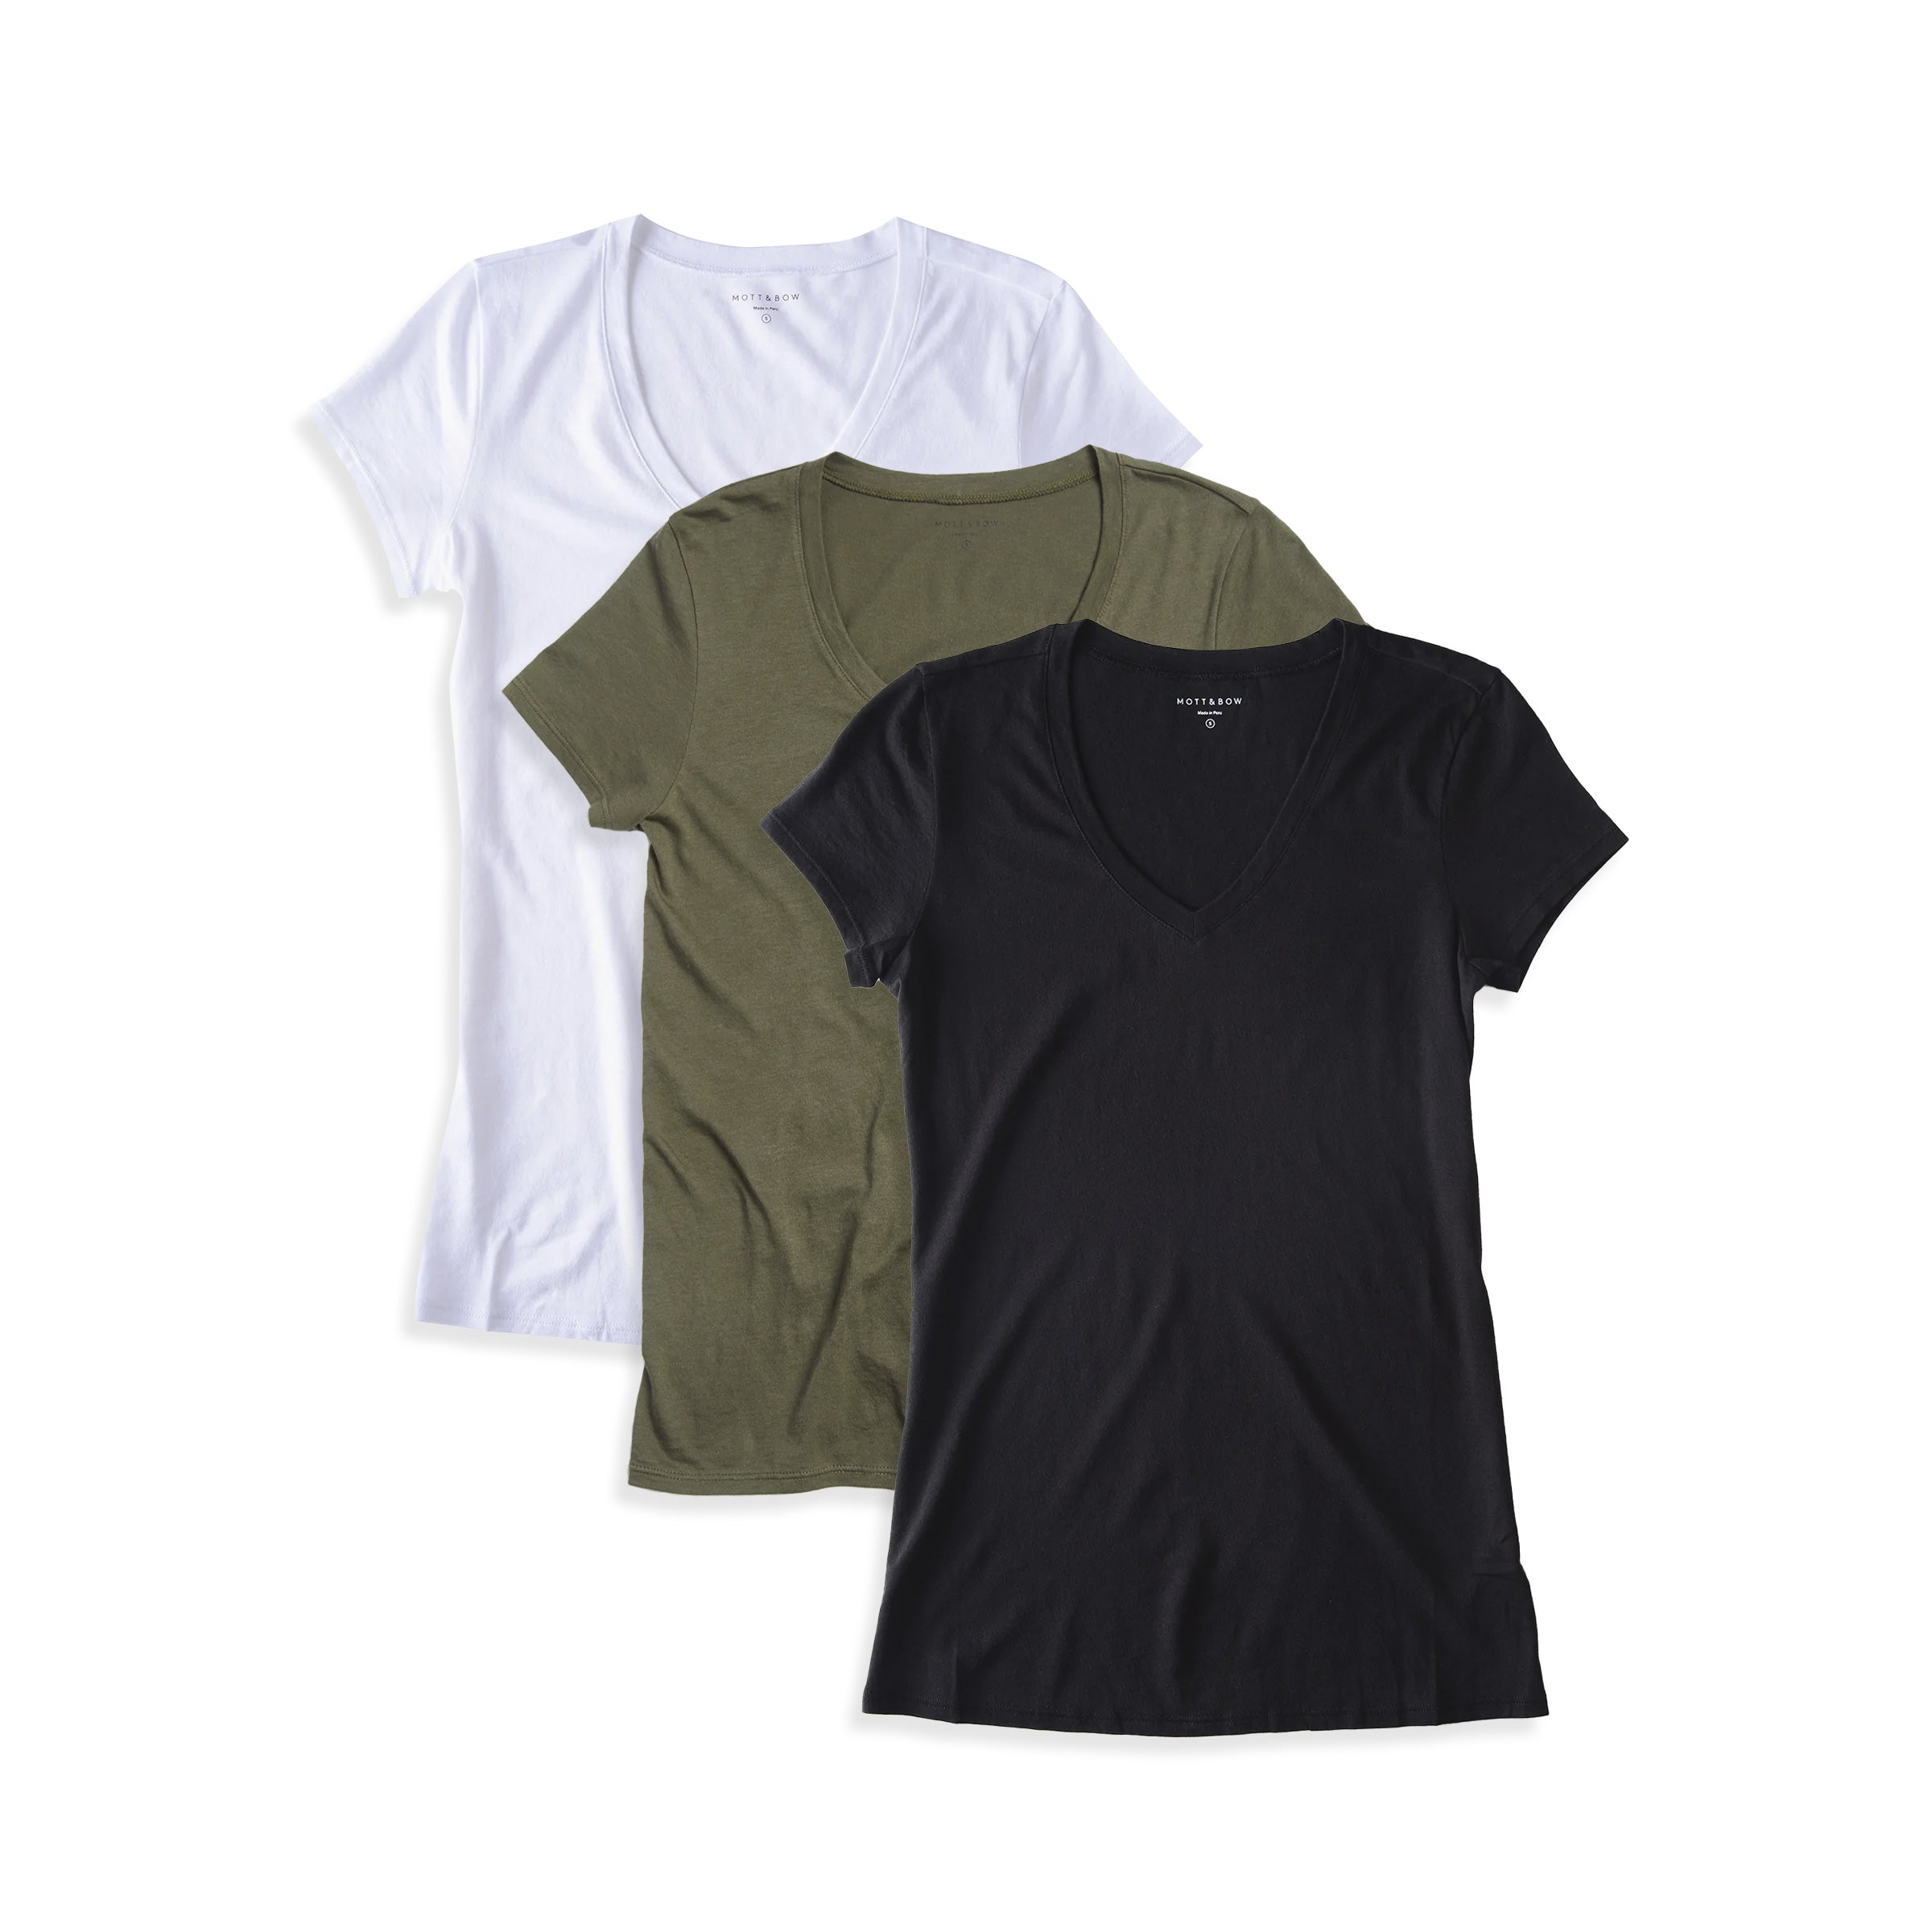  wearing Black/White/Military Green Fitted V-Neck Marcy 3-Pack